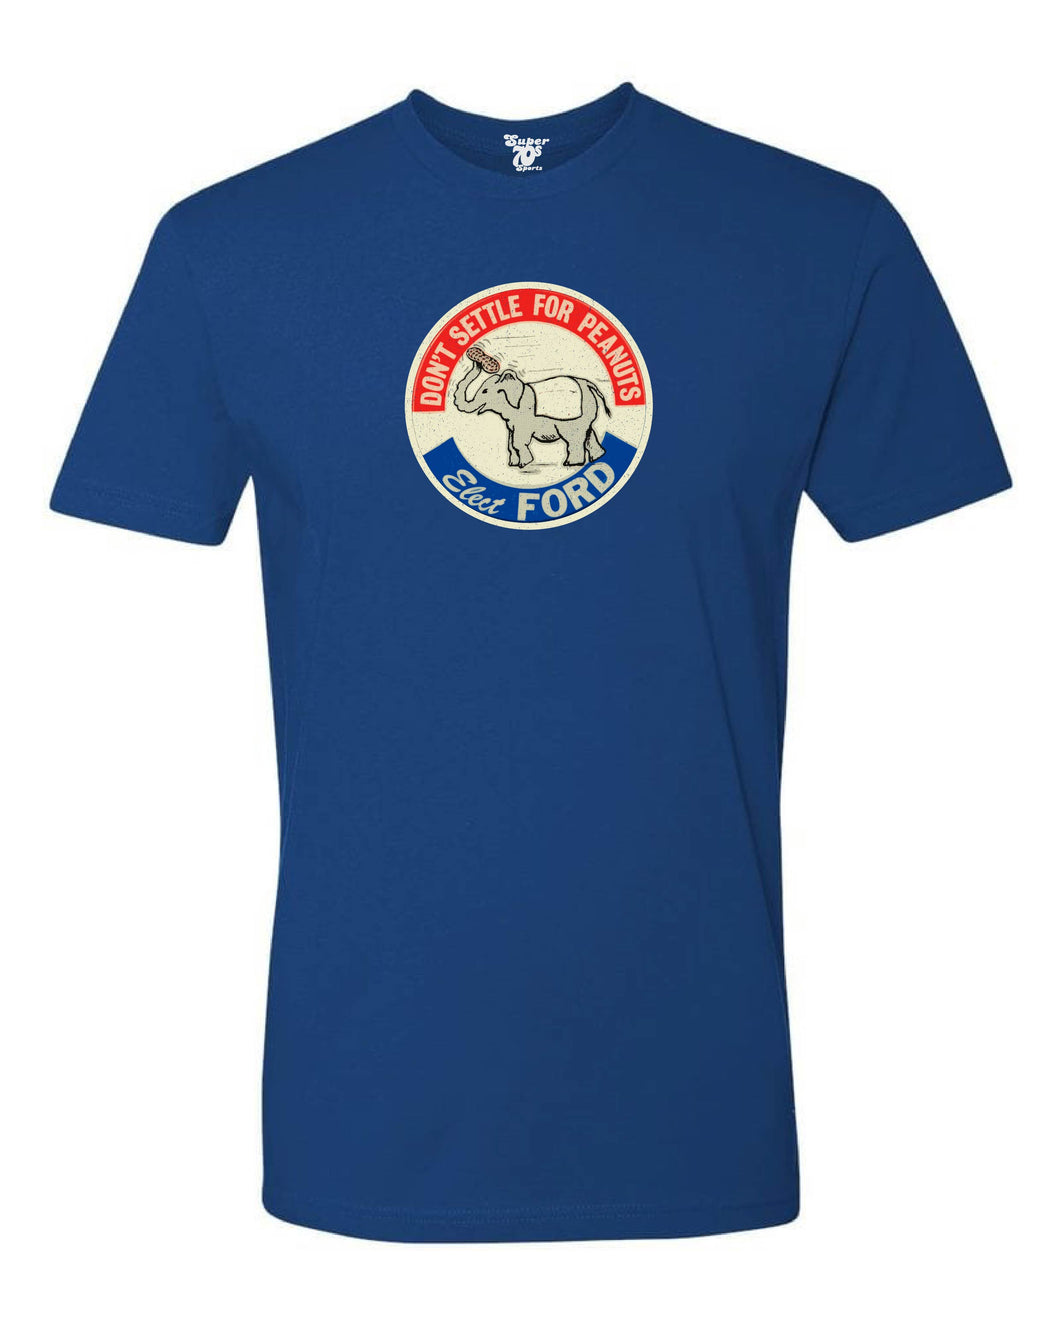 Elect Ford Tee – Super 70s Sports